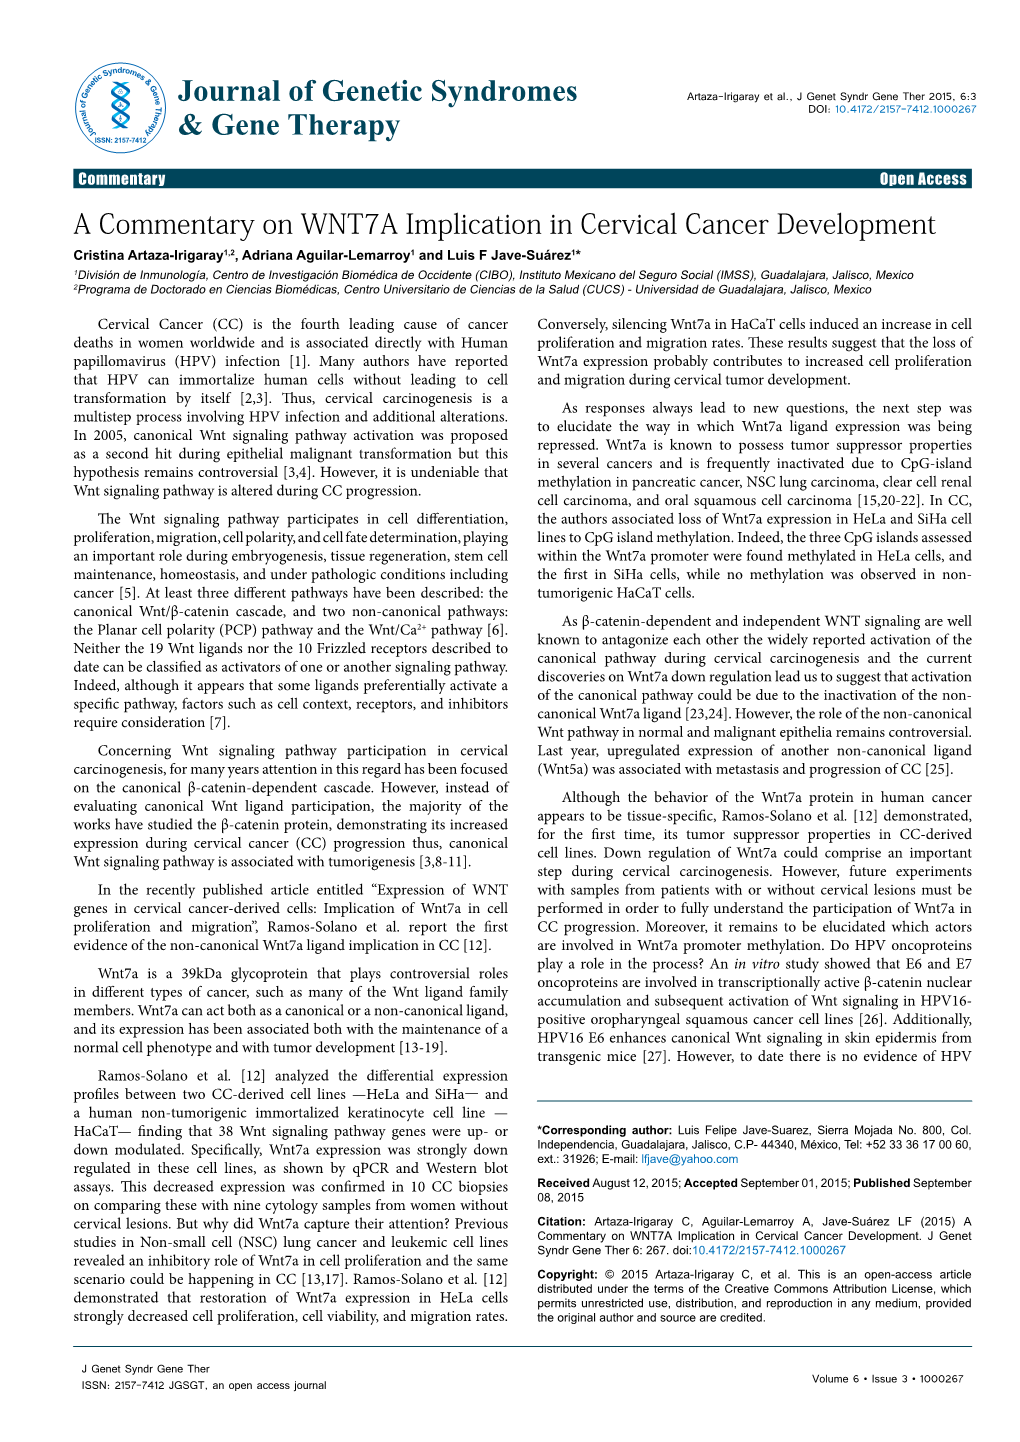 A Commentary on WNT7A Implication in Cervical Cancer Development